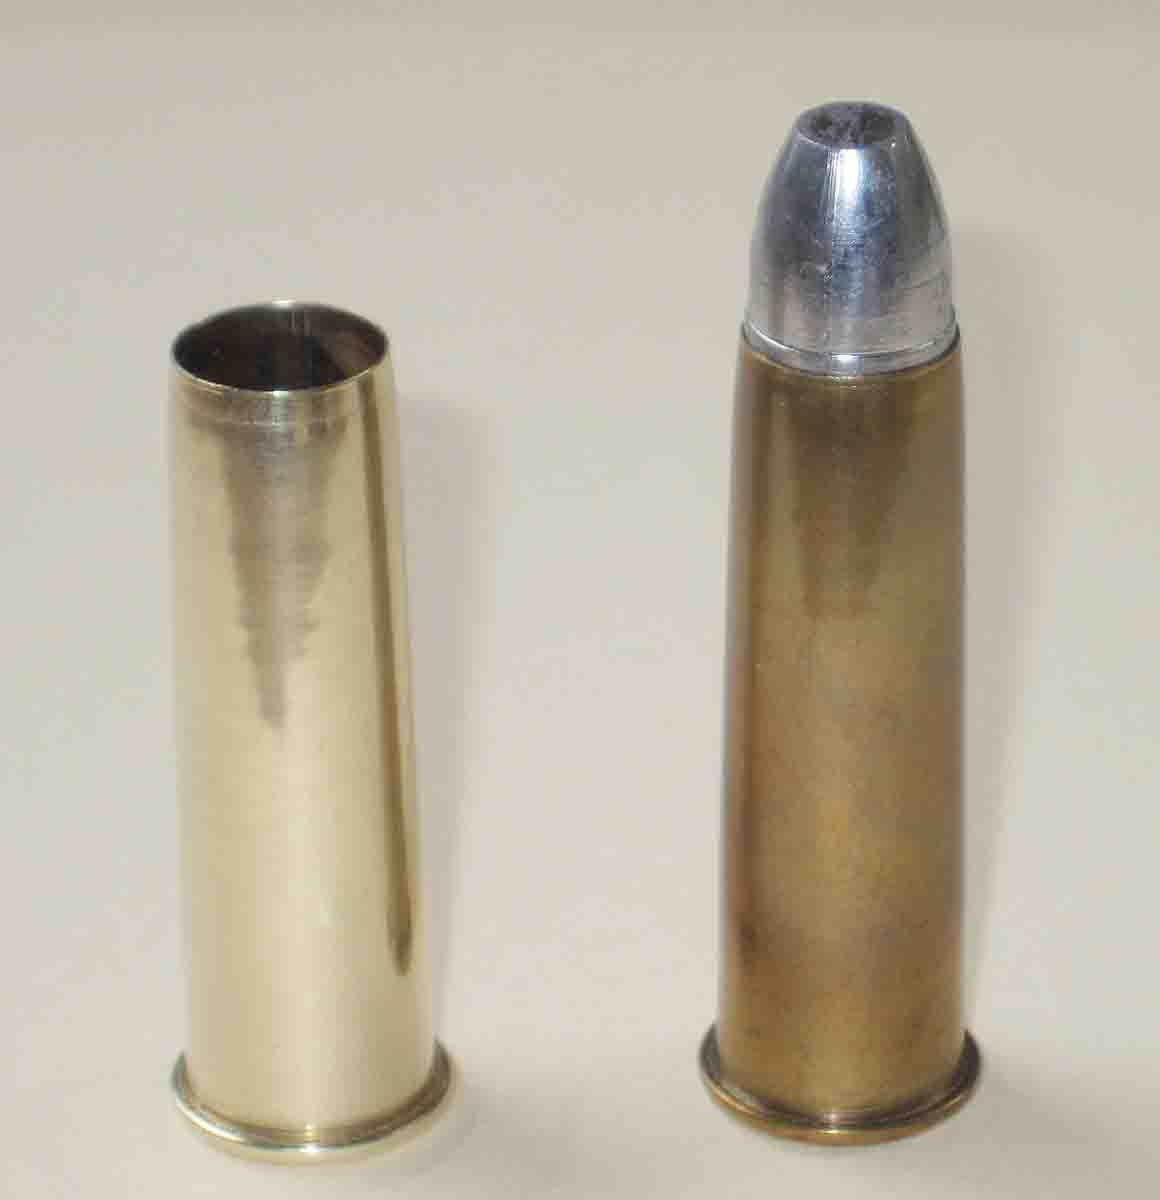 Wildcat case, shortened and fireformed from .43 Beaumont for naked bullet, is 1.90 inches long, with mouth inner diameter of .460 inch.